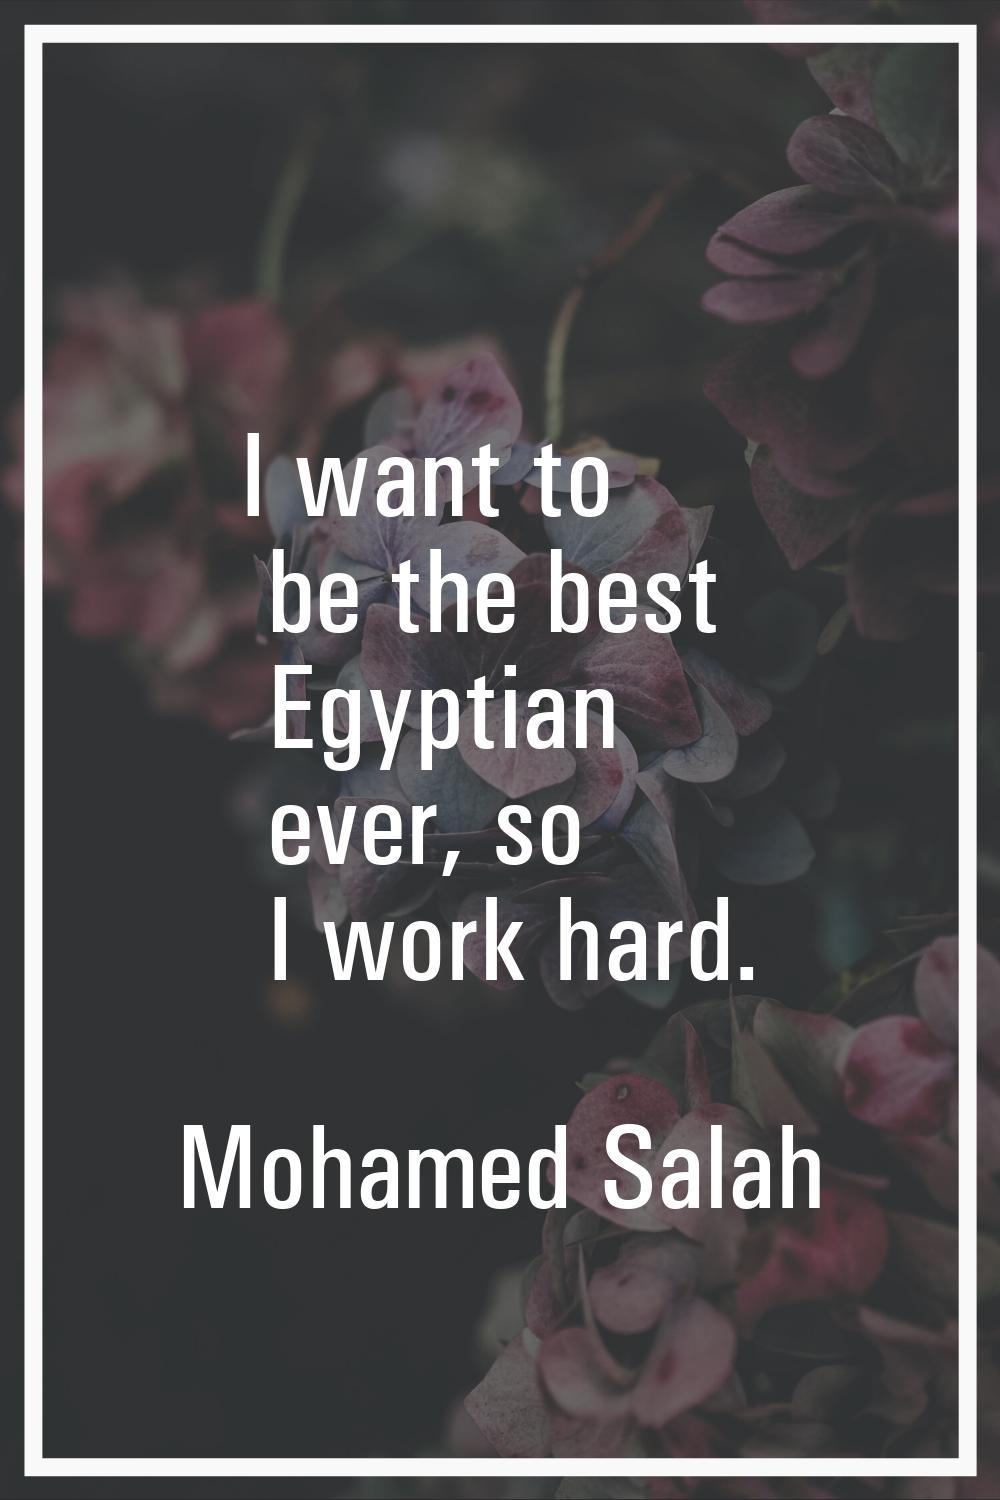 I want to be the best Egyptian ever, so I work hard.